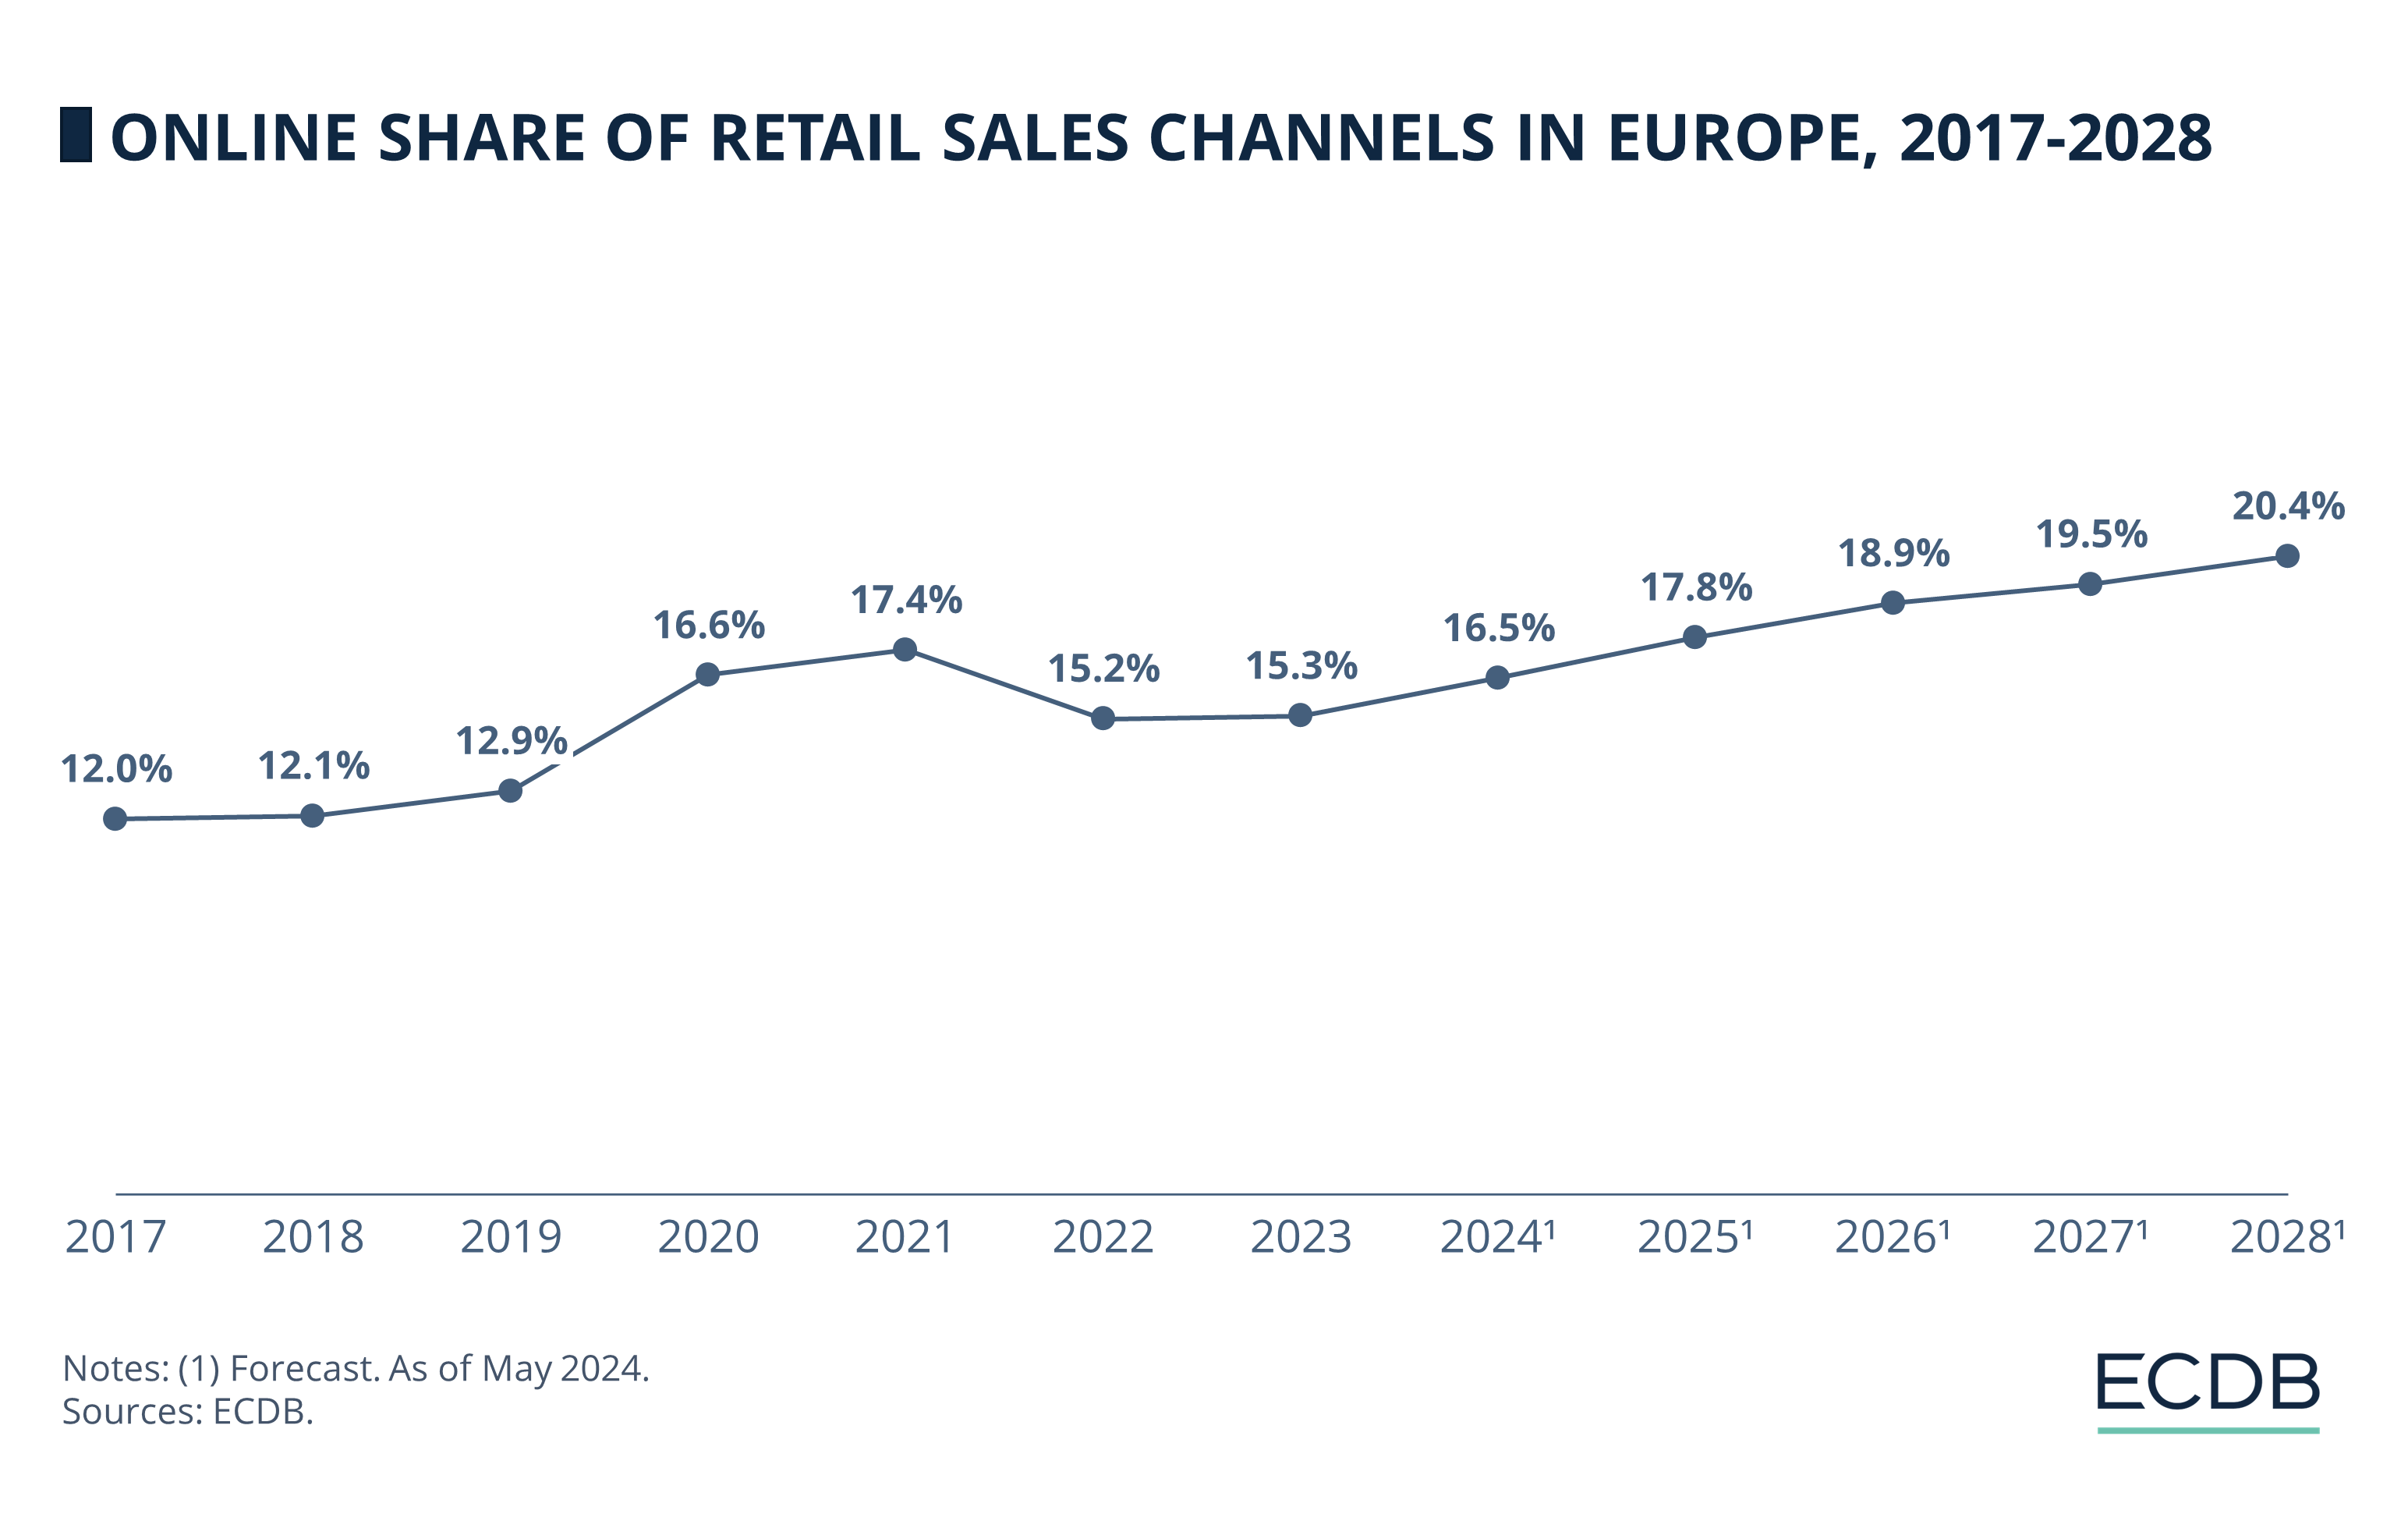 Online Share of Retail Sales Channels in Europe, 2017-2028